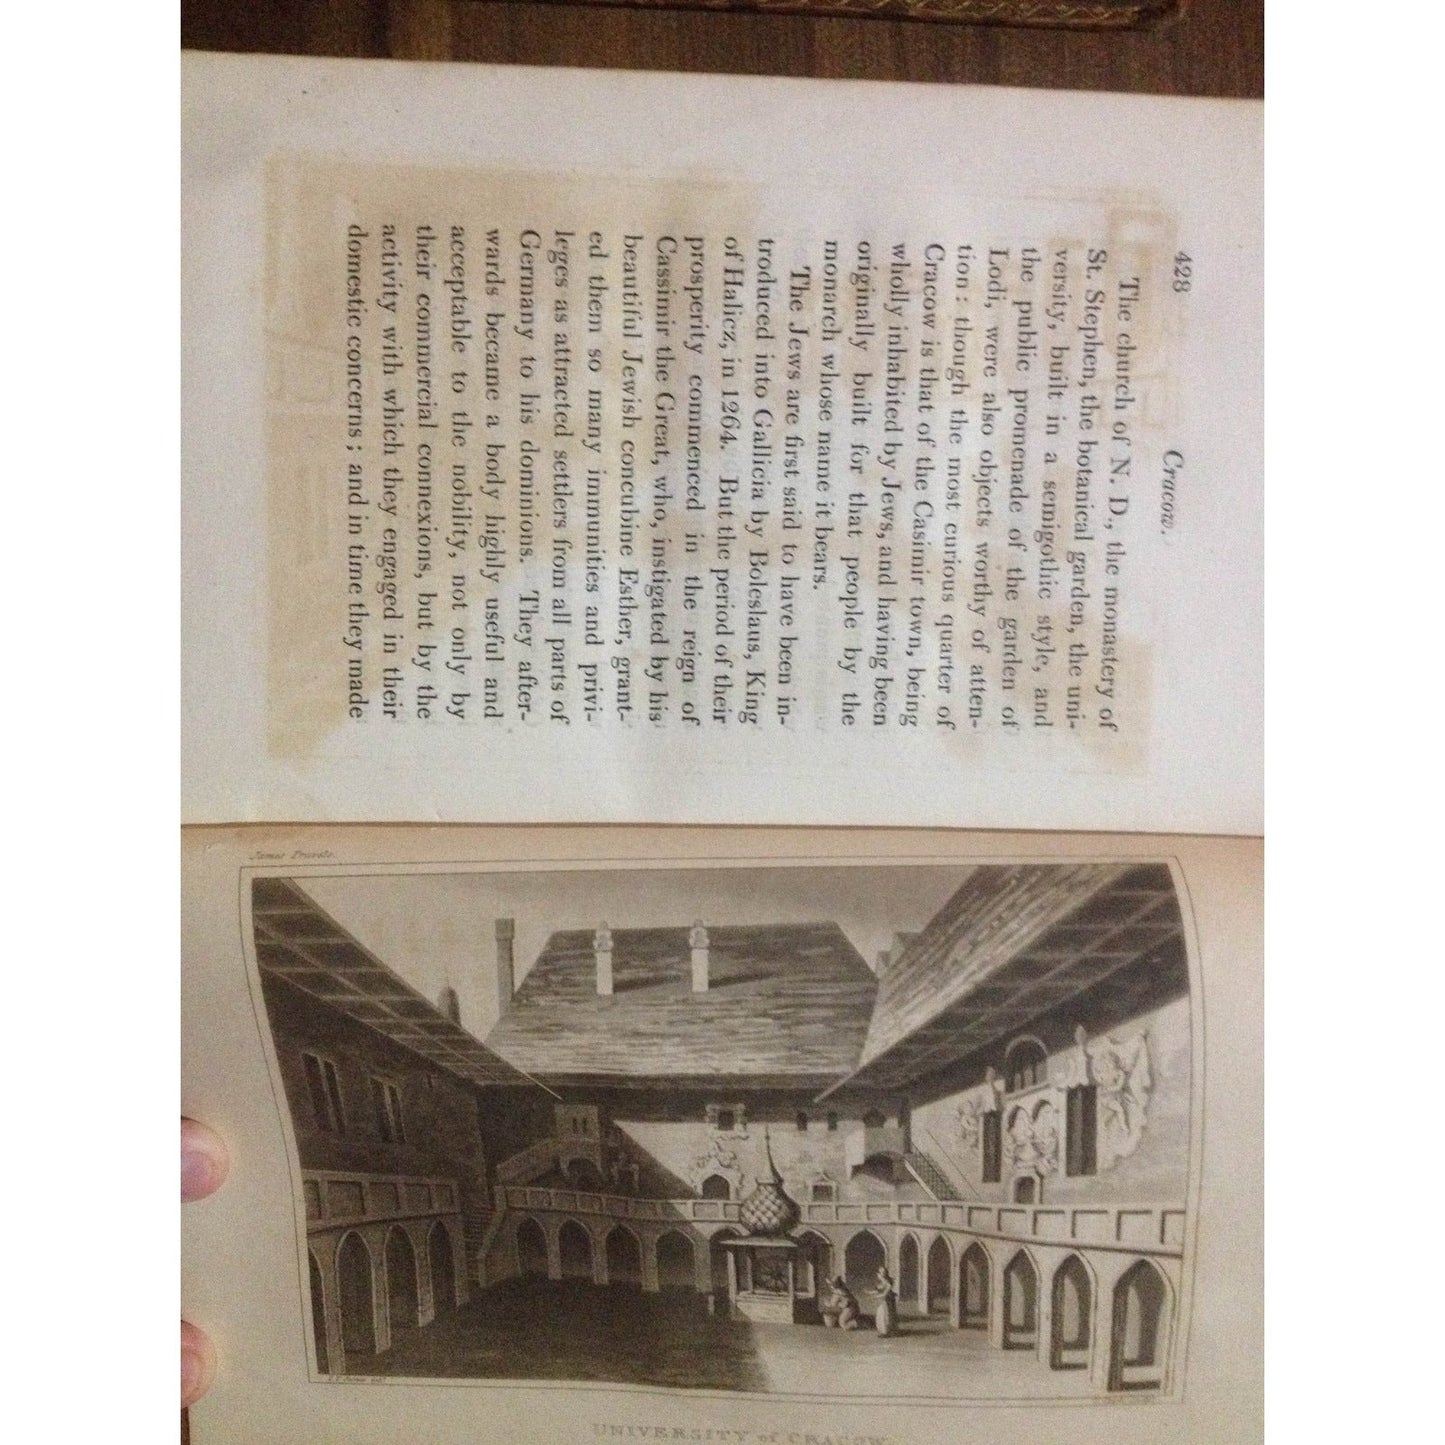 JOURNAL OF A TOUR IN GERMANY/ SWEDEN/RUSSIA POLAND IN 1813-1814  BY:  J.T. JAMES BooksCardsNBikes